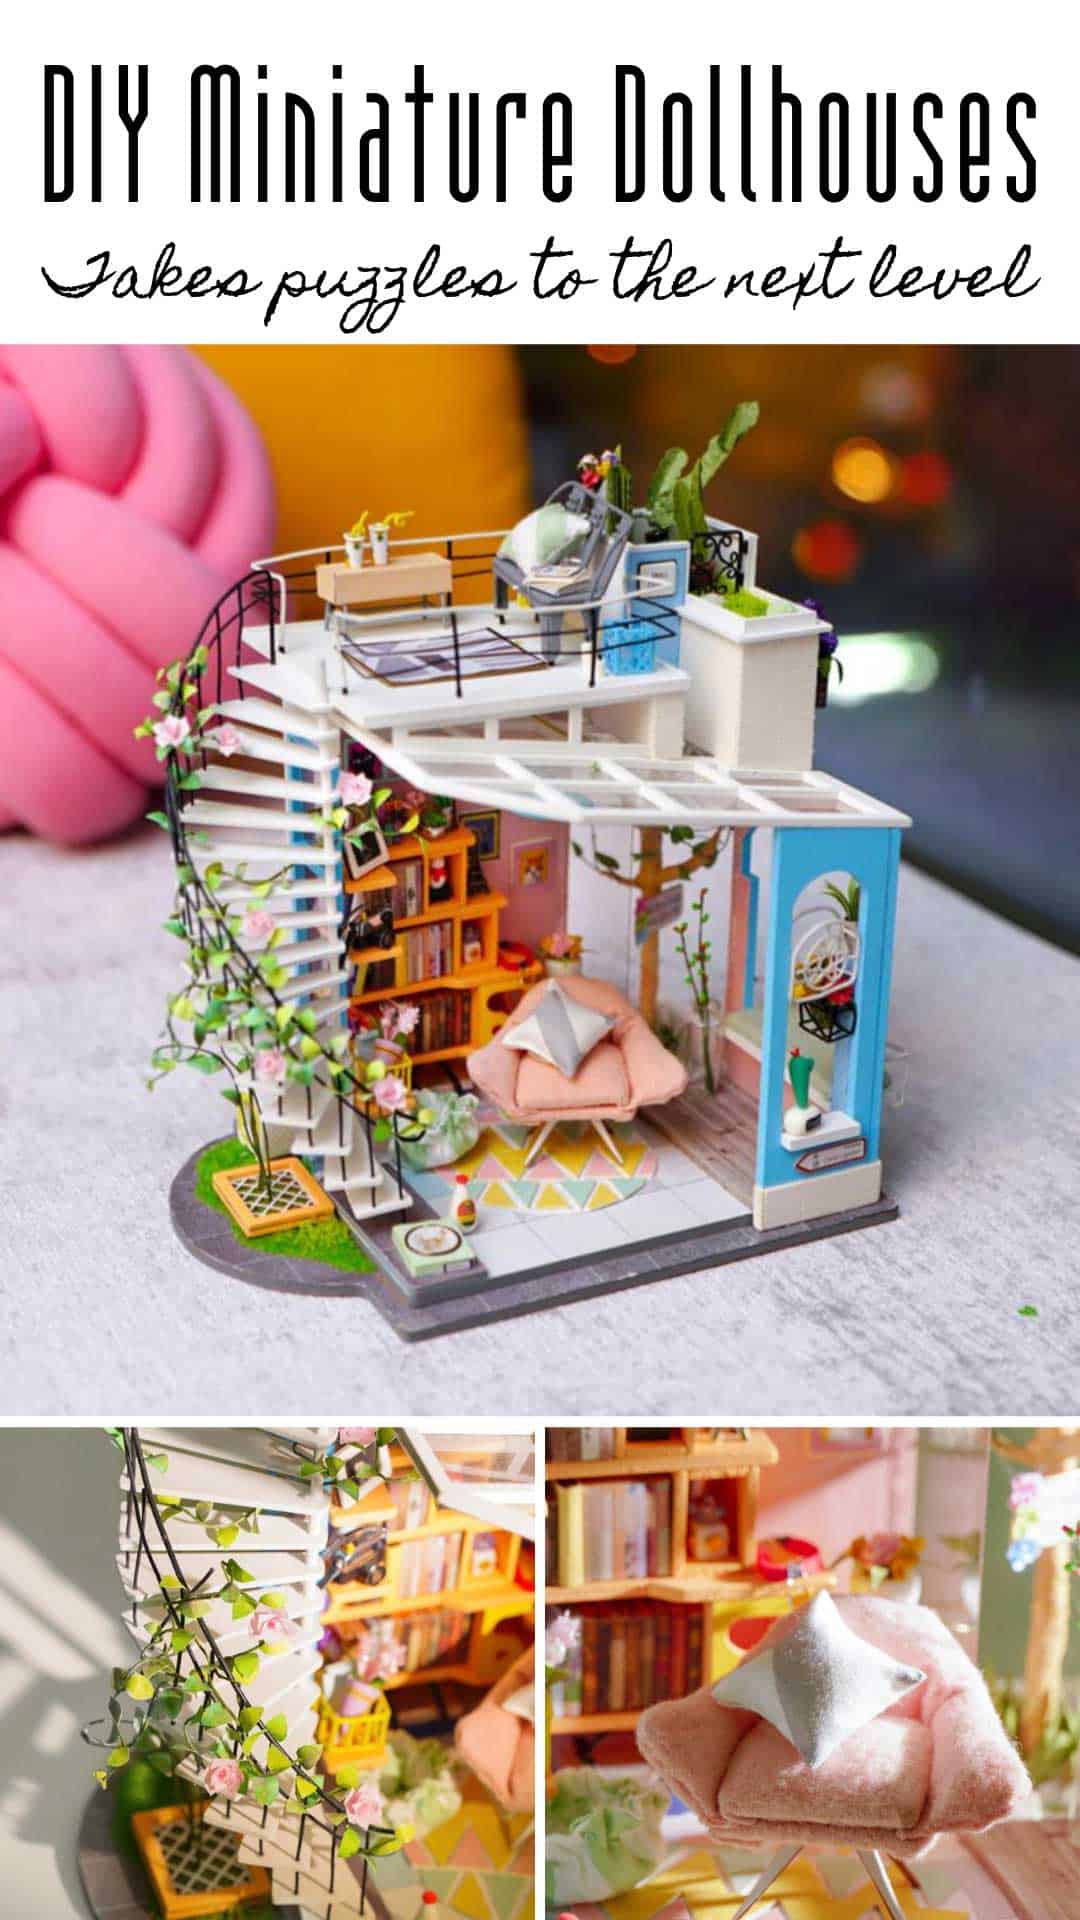 These DIY miniature dollhouse kits are mindblowing - they have so much detail in them! They're the perfect Christmas gift for the crafter on your list! #christmas